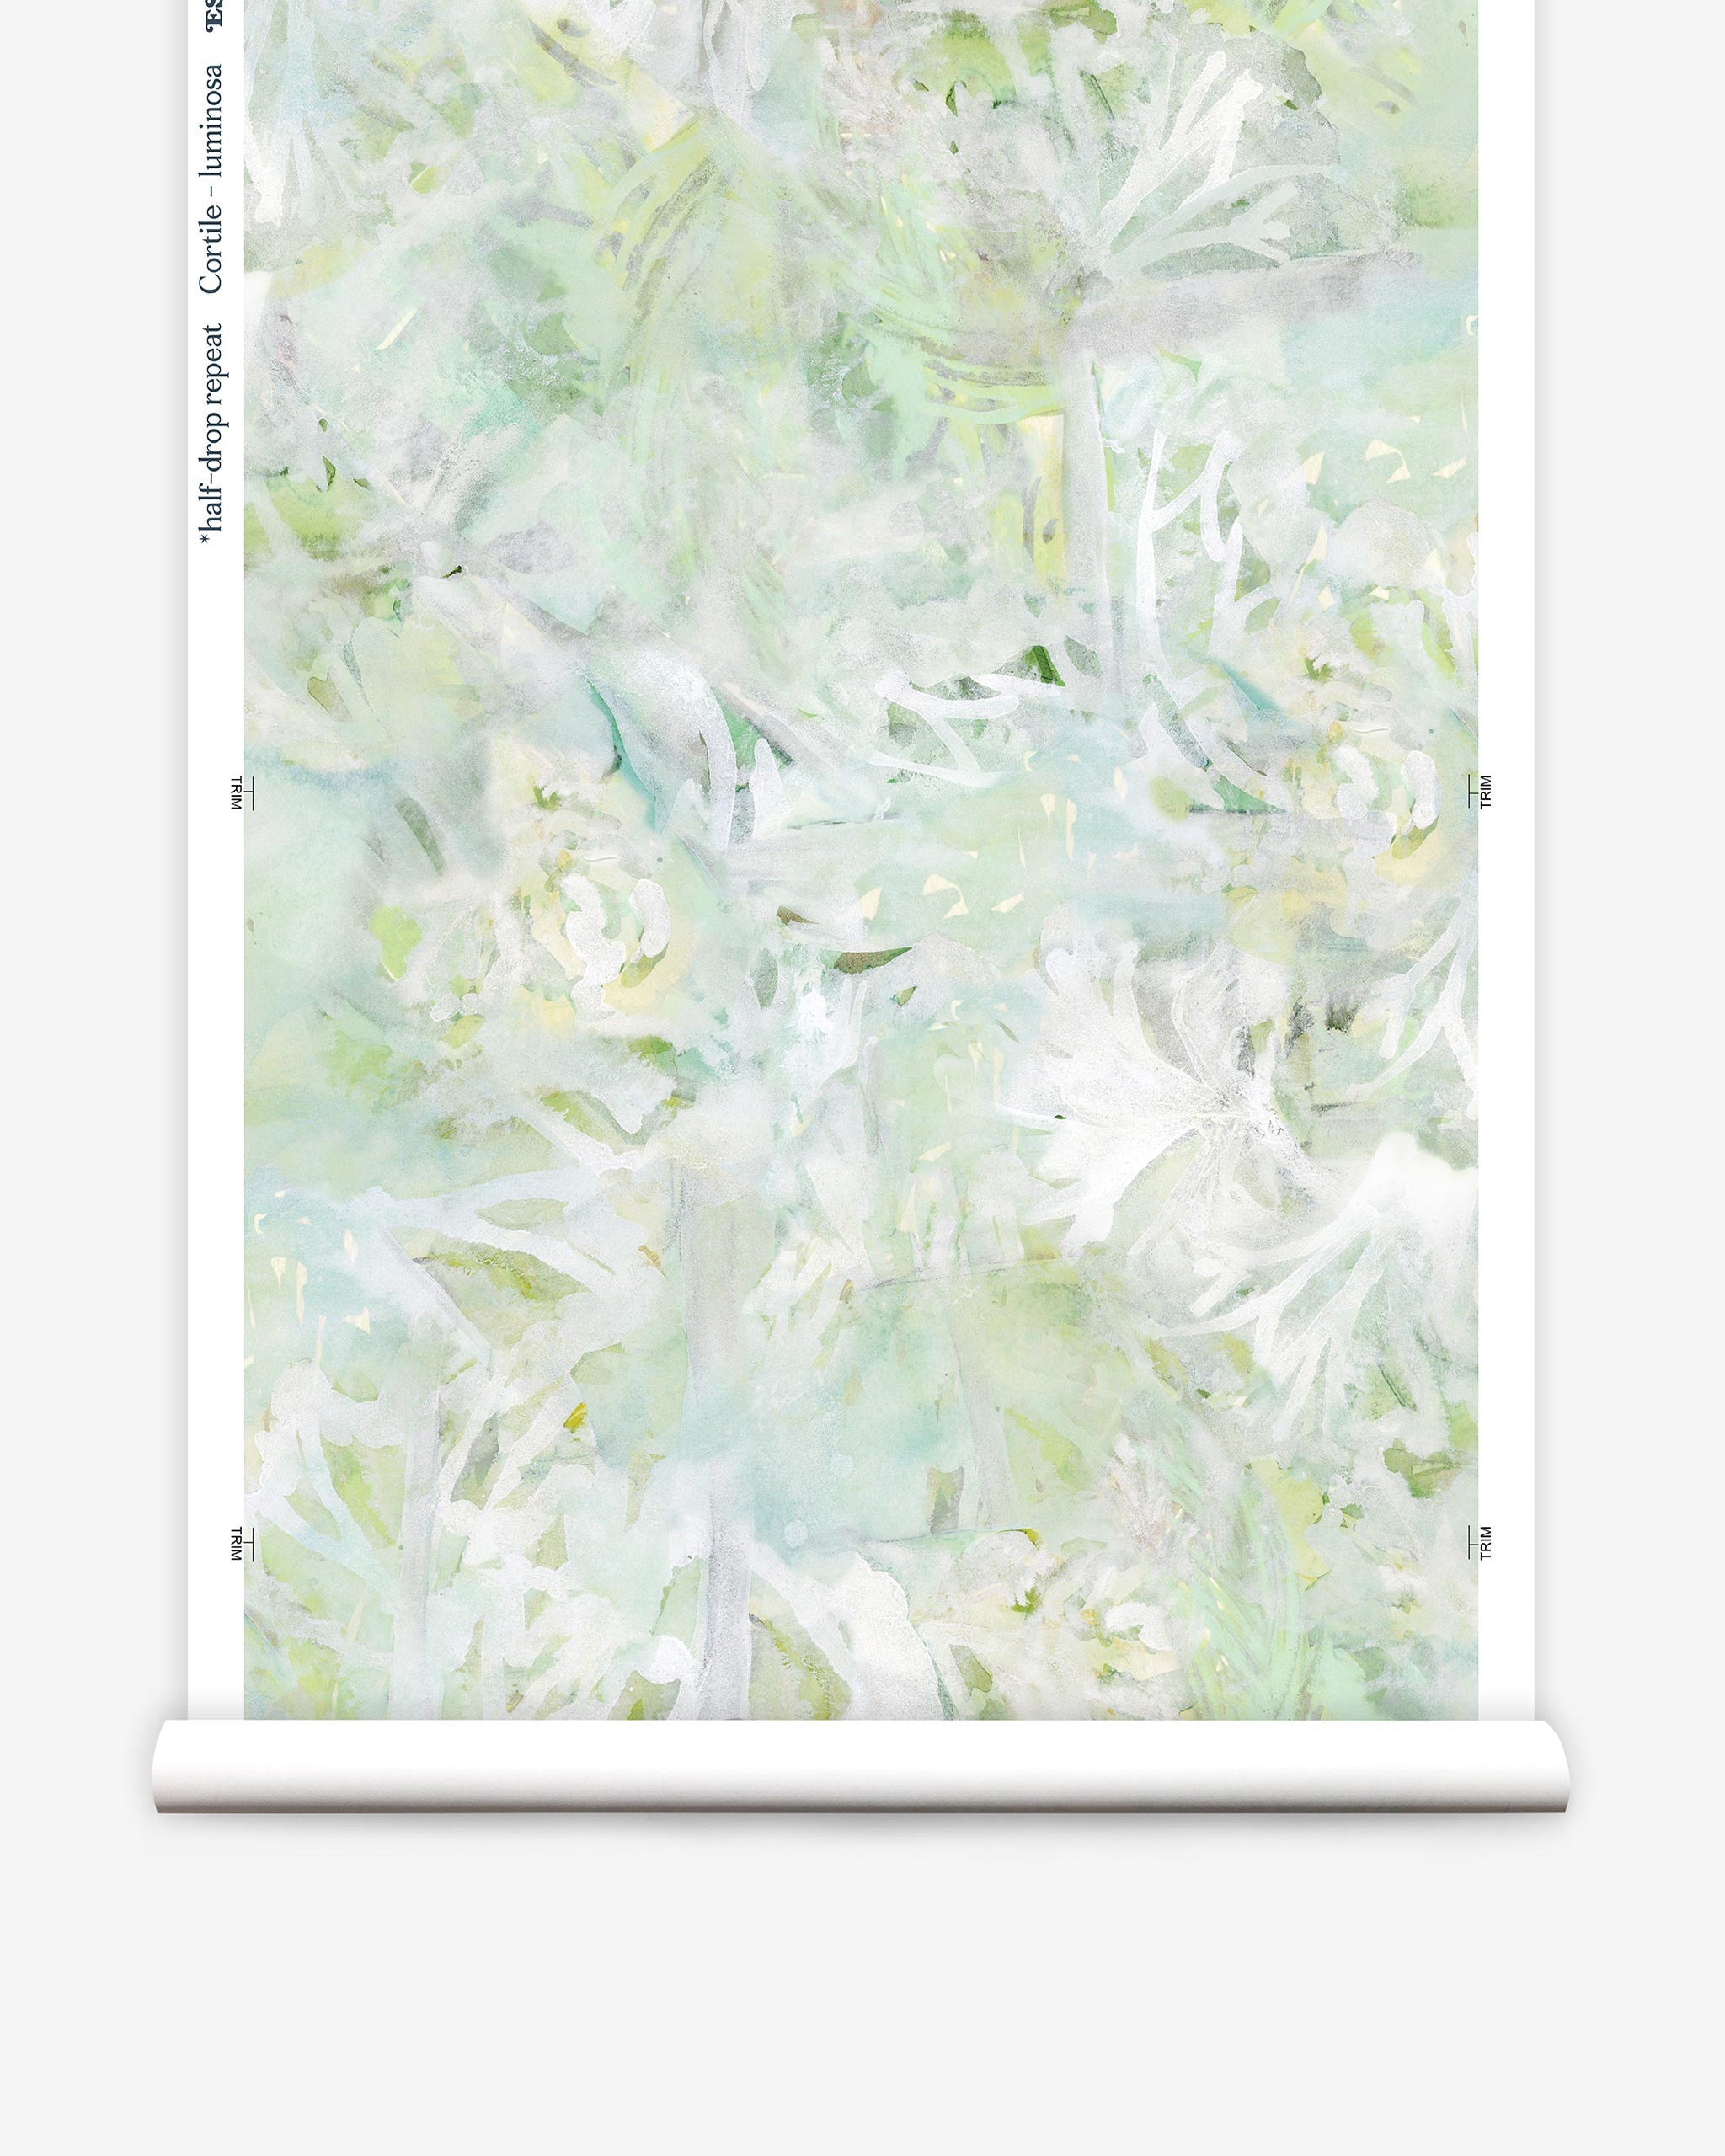 Partially unrolled wallpaper yardage in an abstract painted print in shades of green, yellow and white.